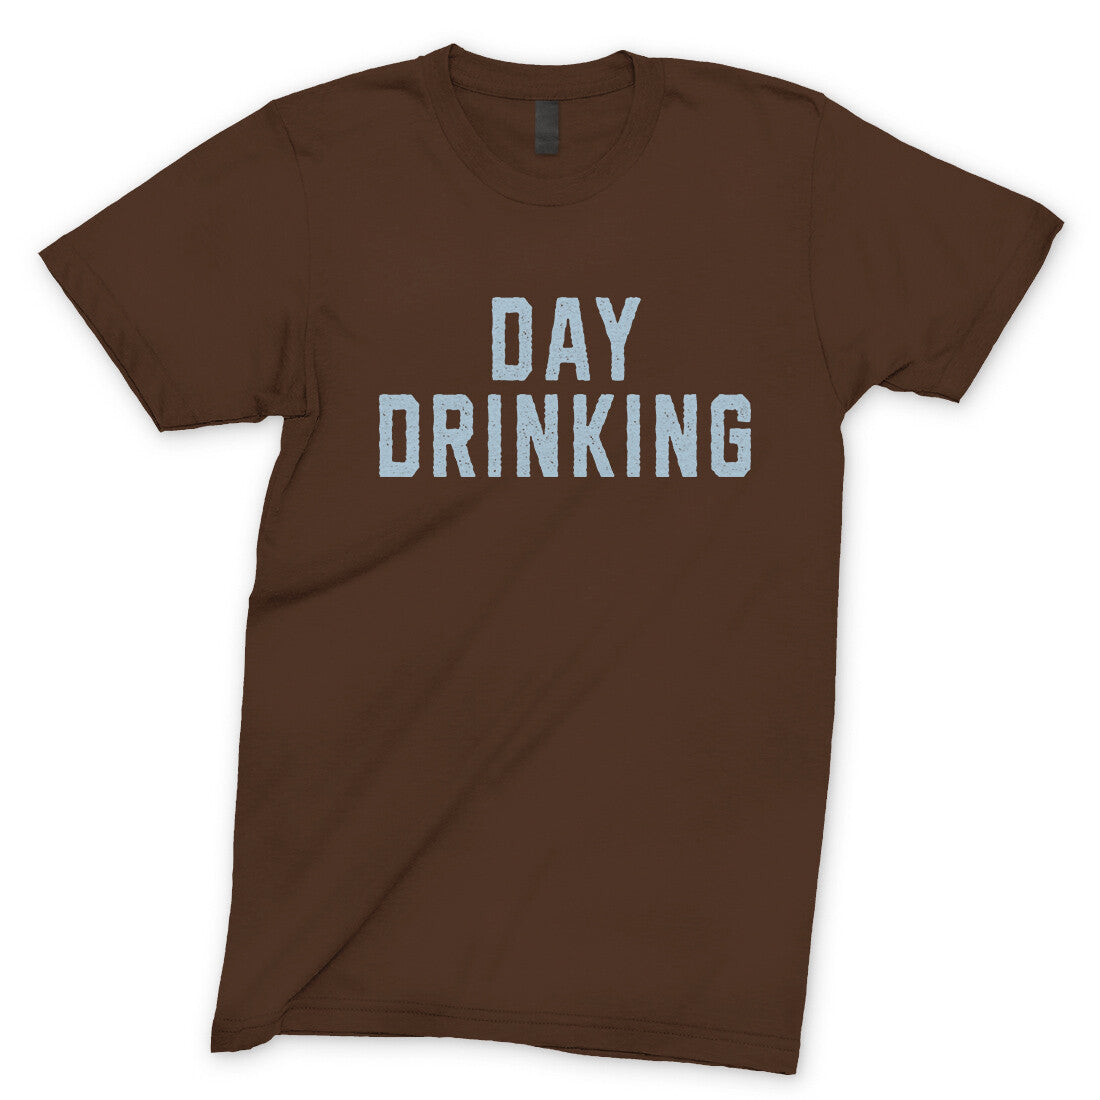 Day Drinking in Dark Chocolate Color